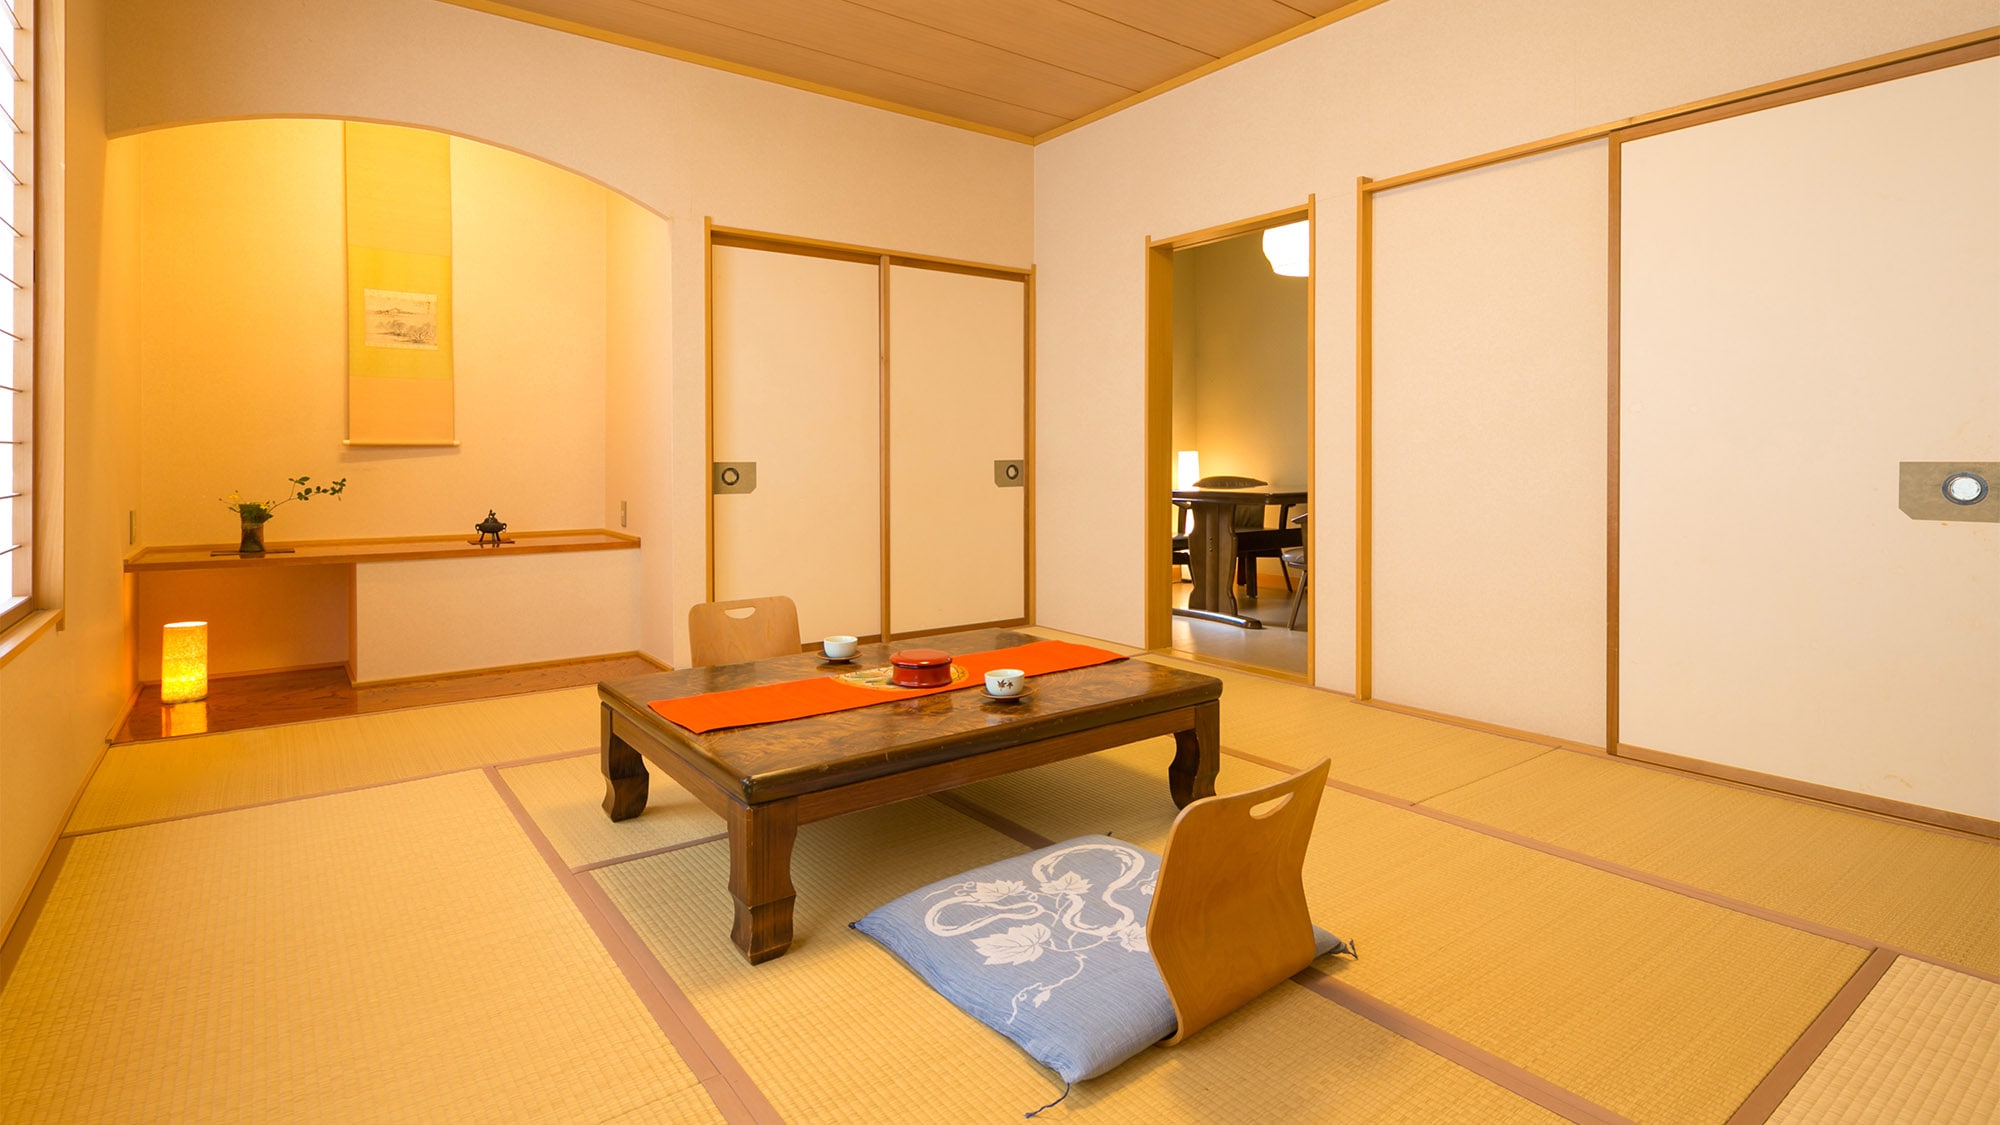 ・ Main building standard guest room: There is a dining room next to Honma.